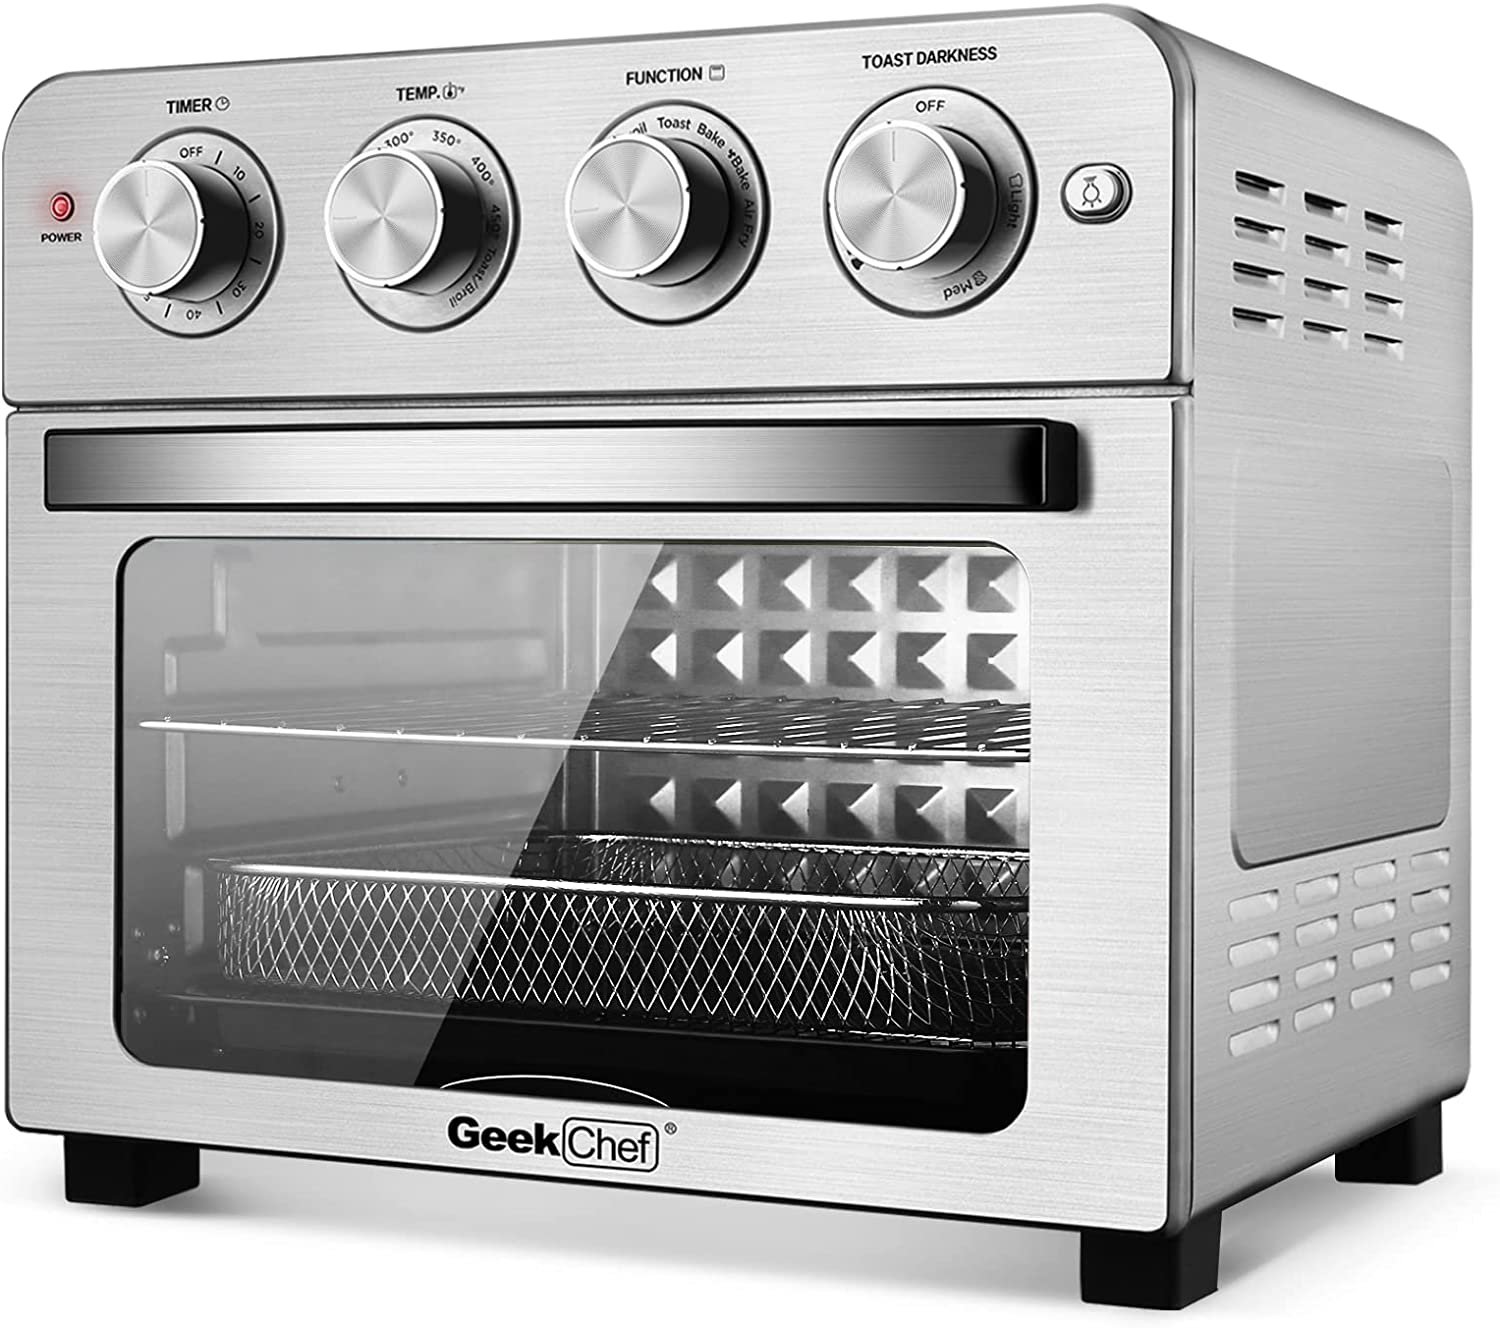 Geek Chef Air Fryer Toaster Oven Reviews